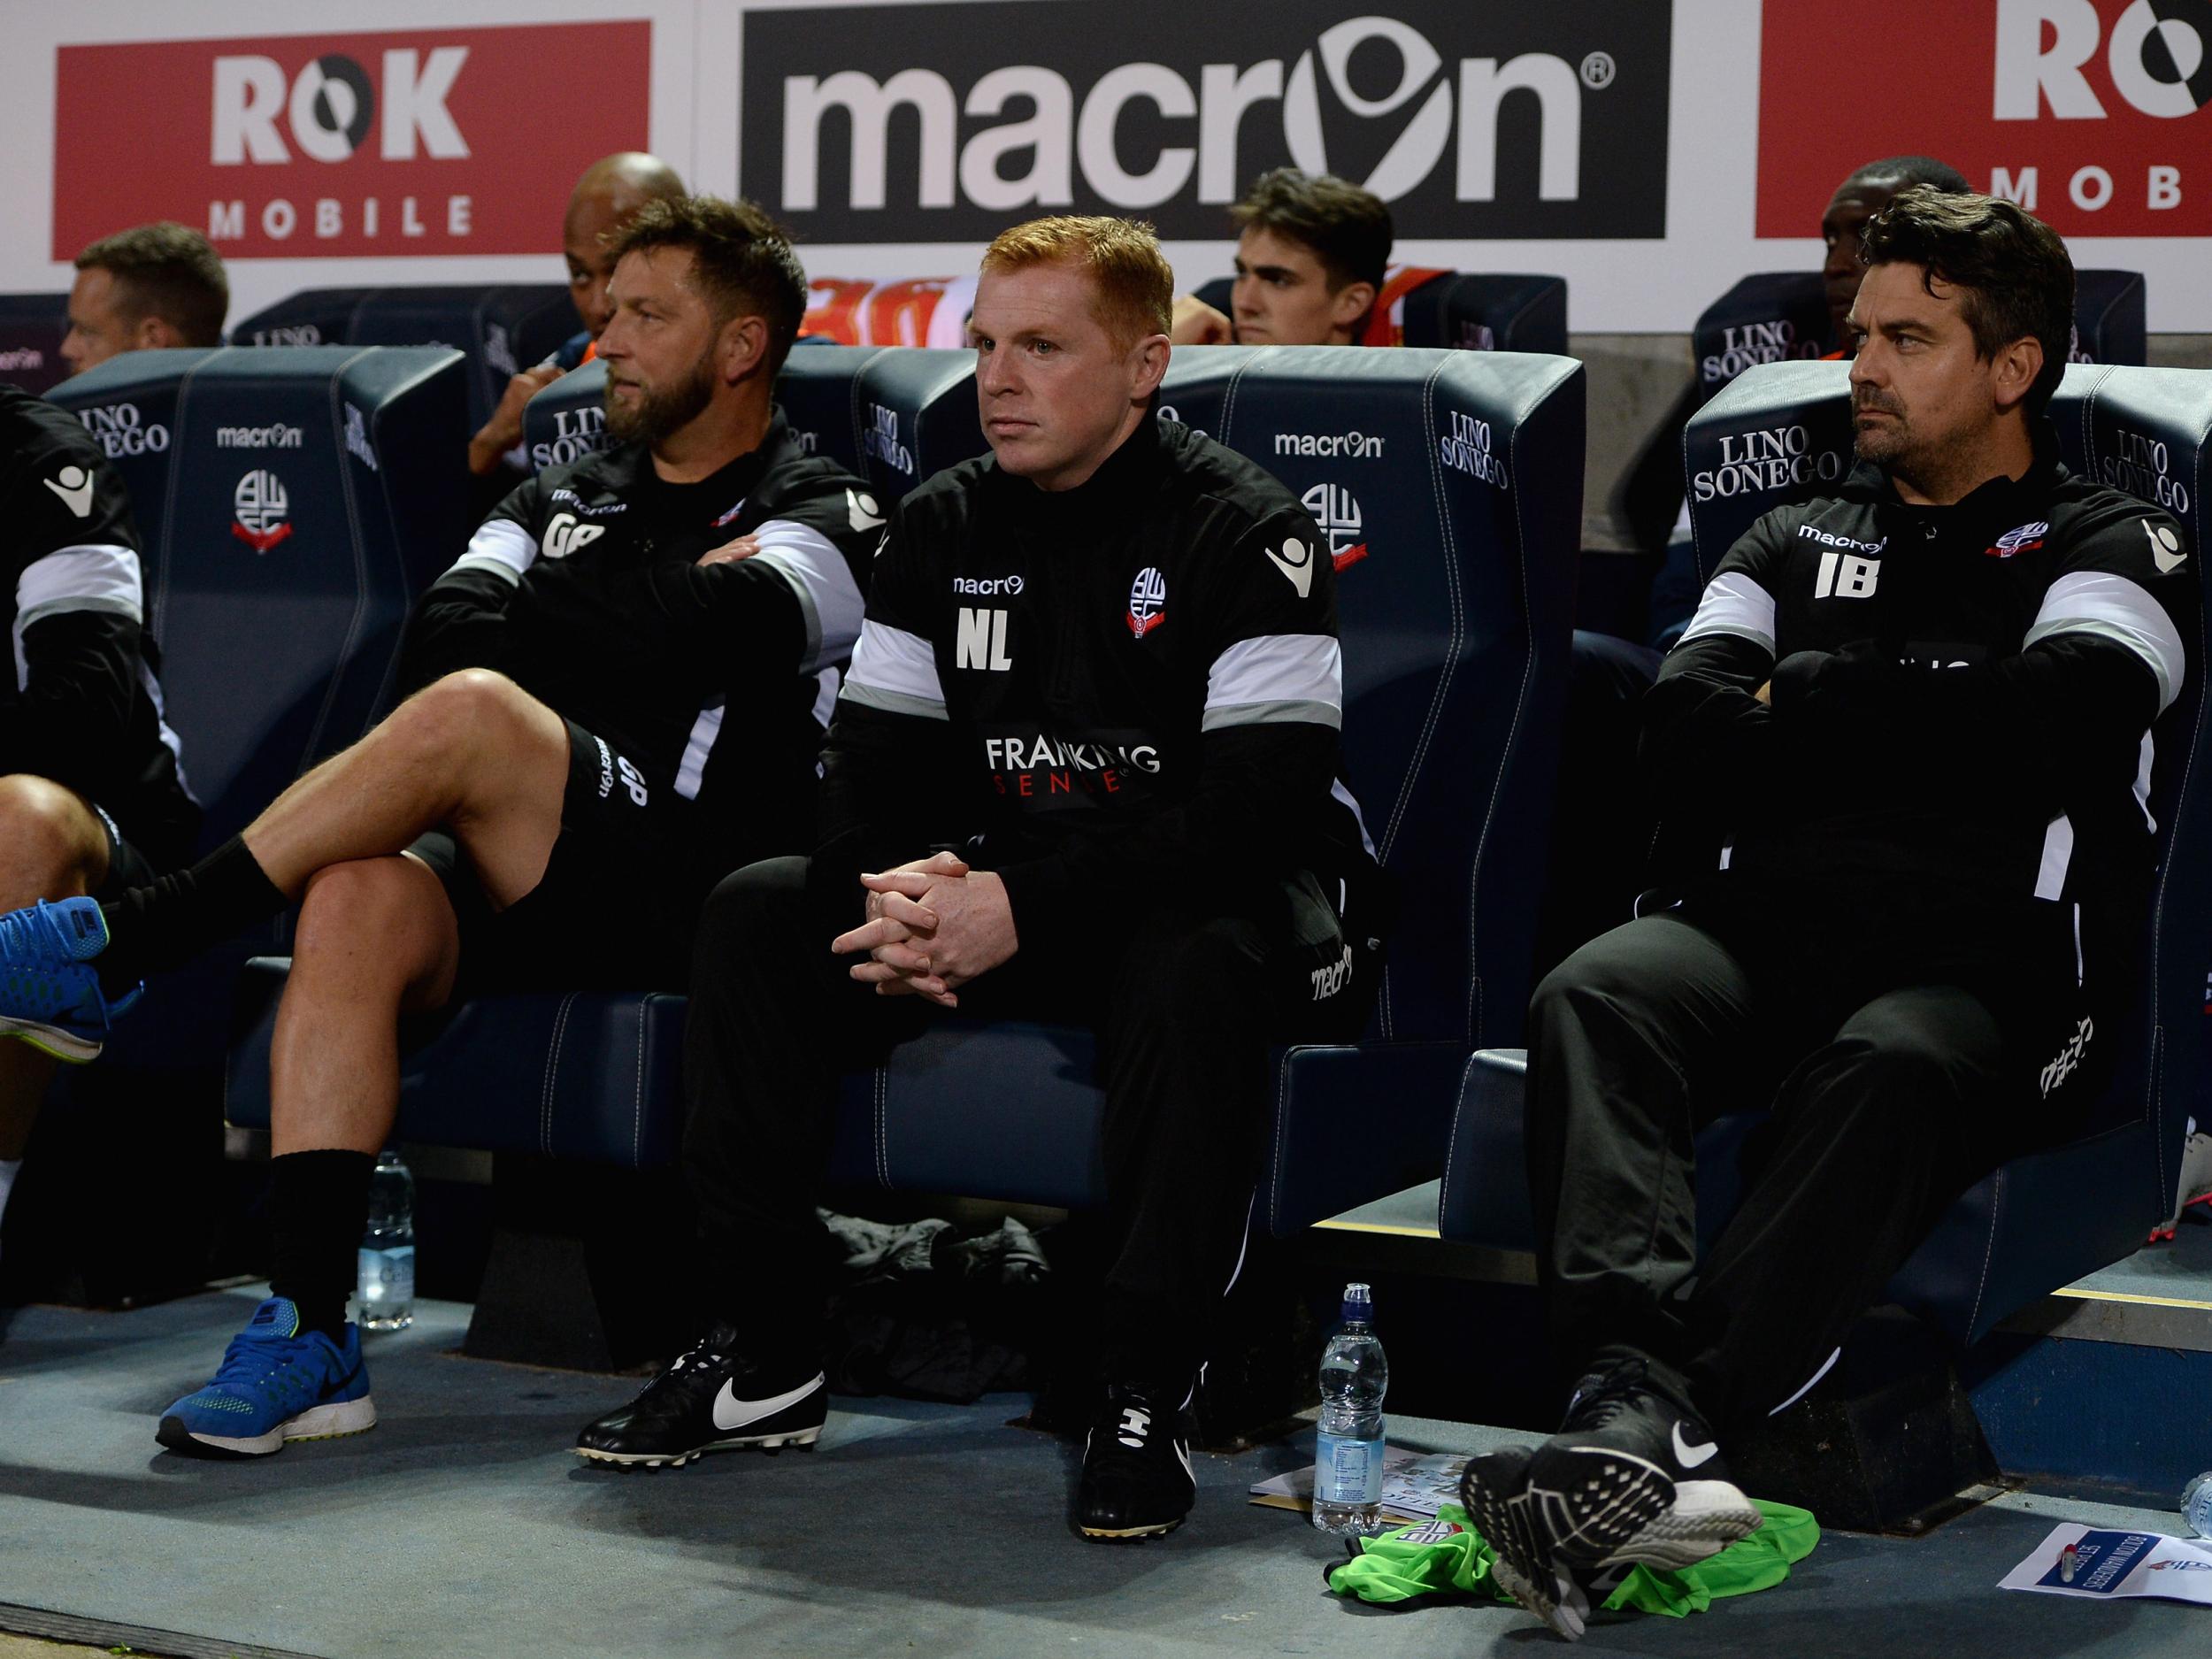 Bolton manager Neil Lennon and his coaching team